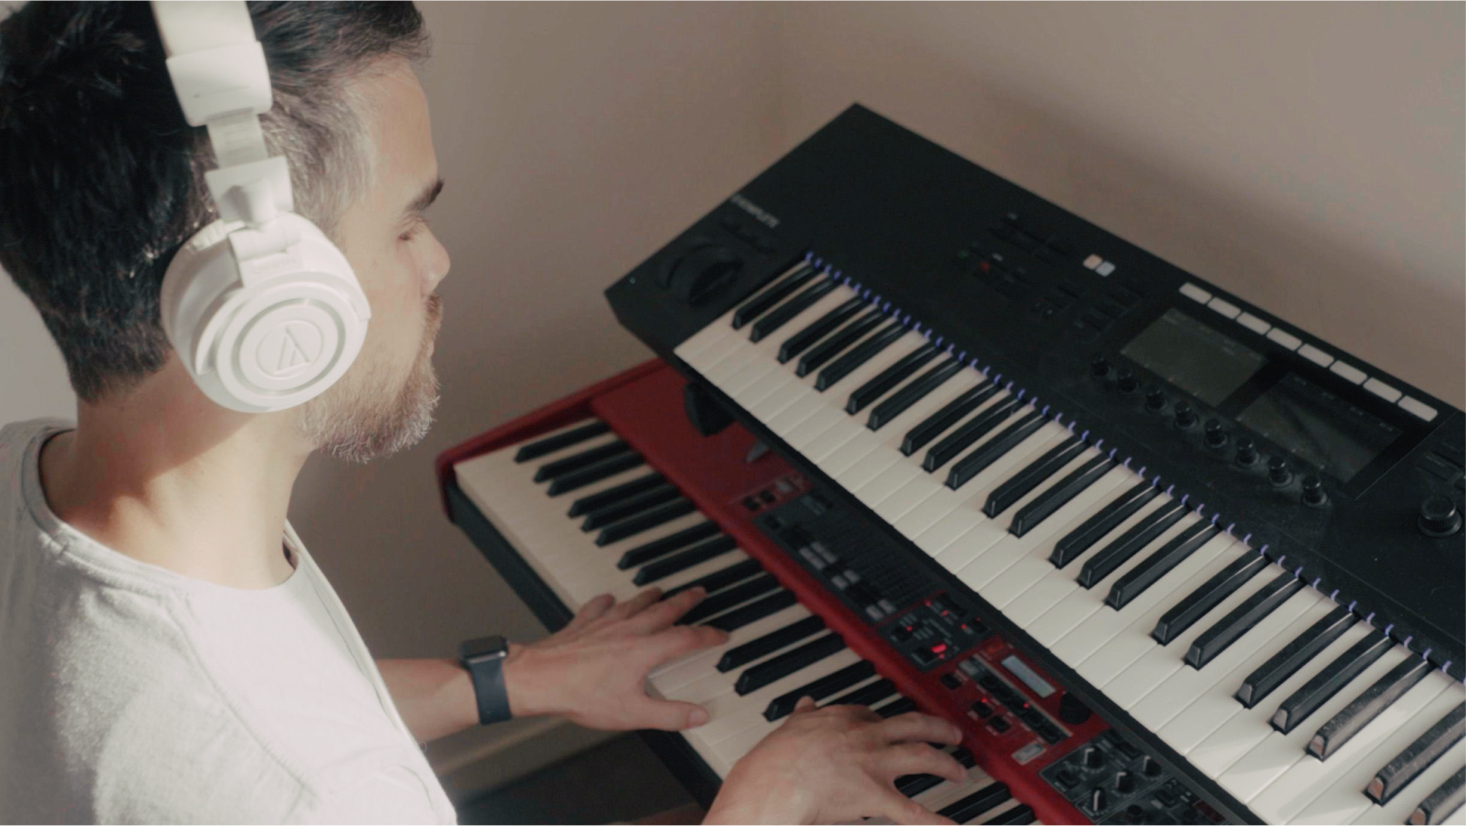 Man with headphones playing an electronic keyboard in a softly lit room.